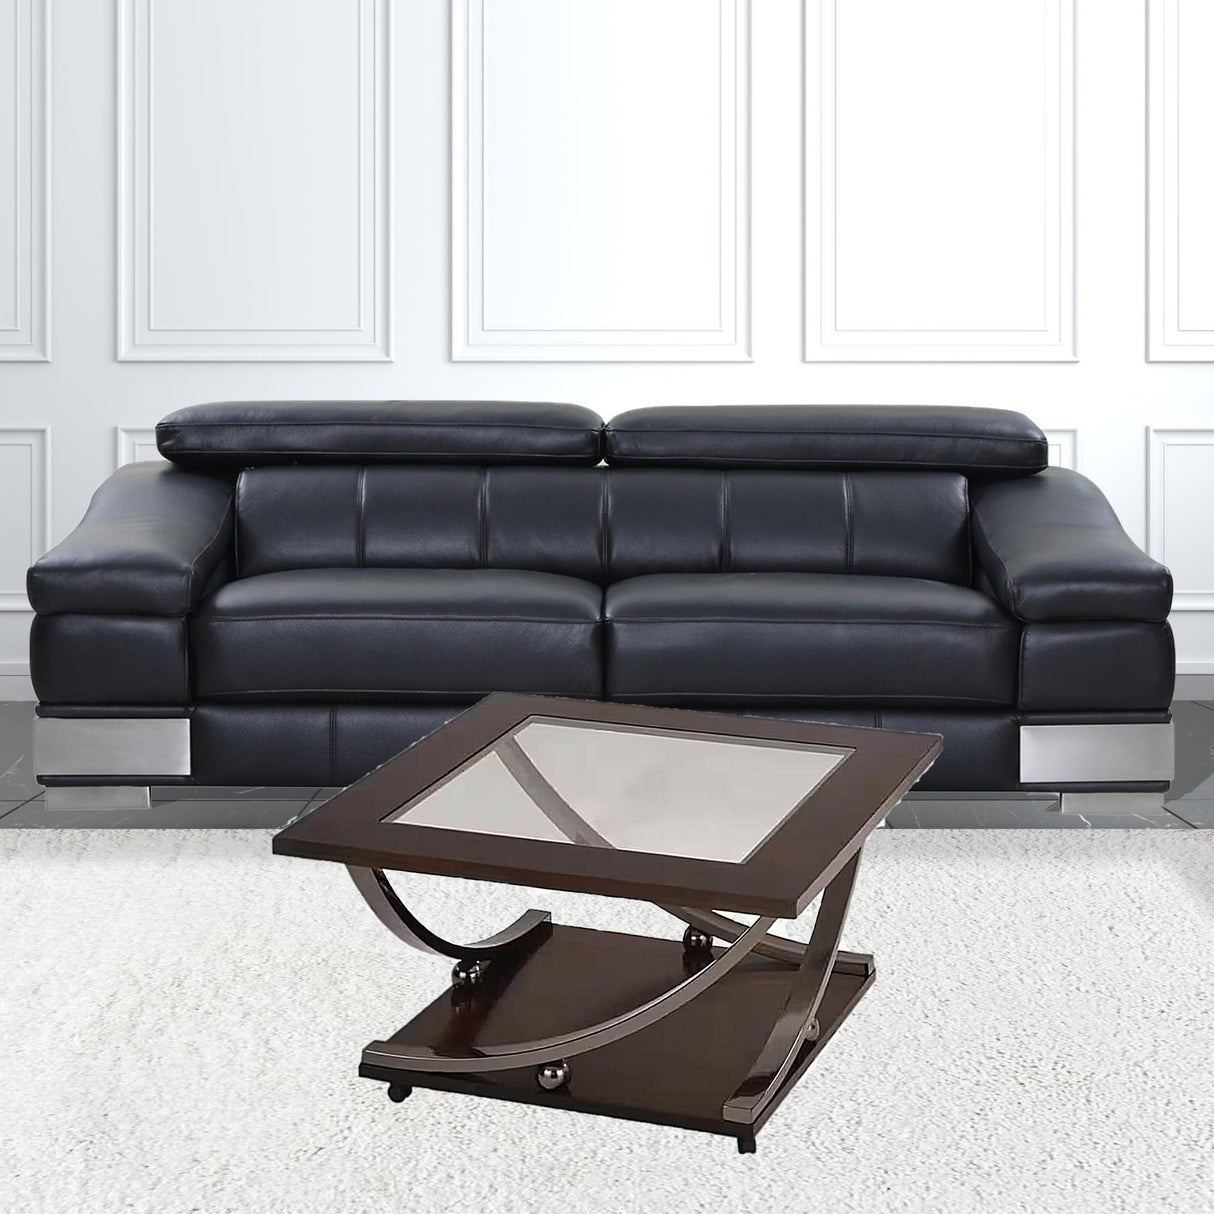 36" Black Nickel And Clear Glass Square Coffee Table With Shelf